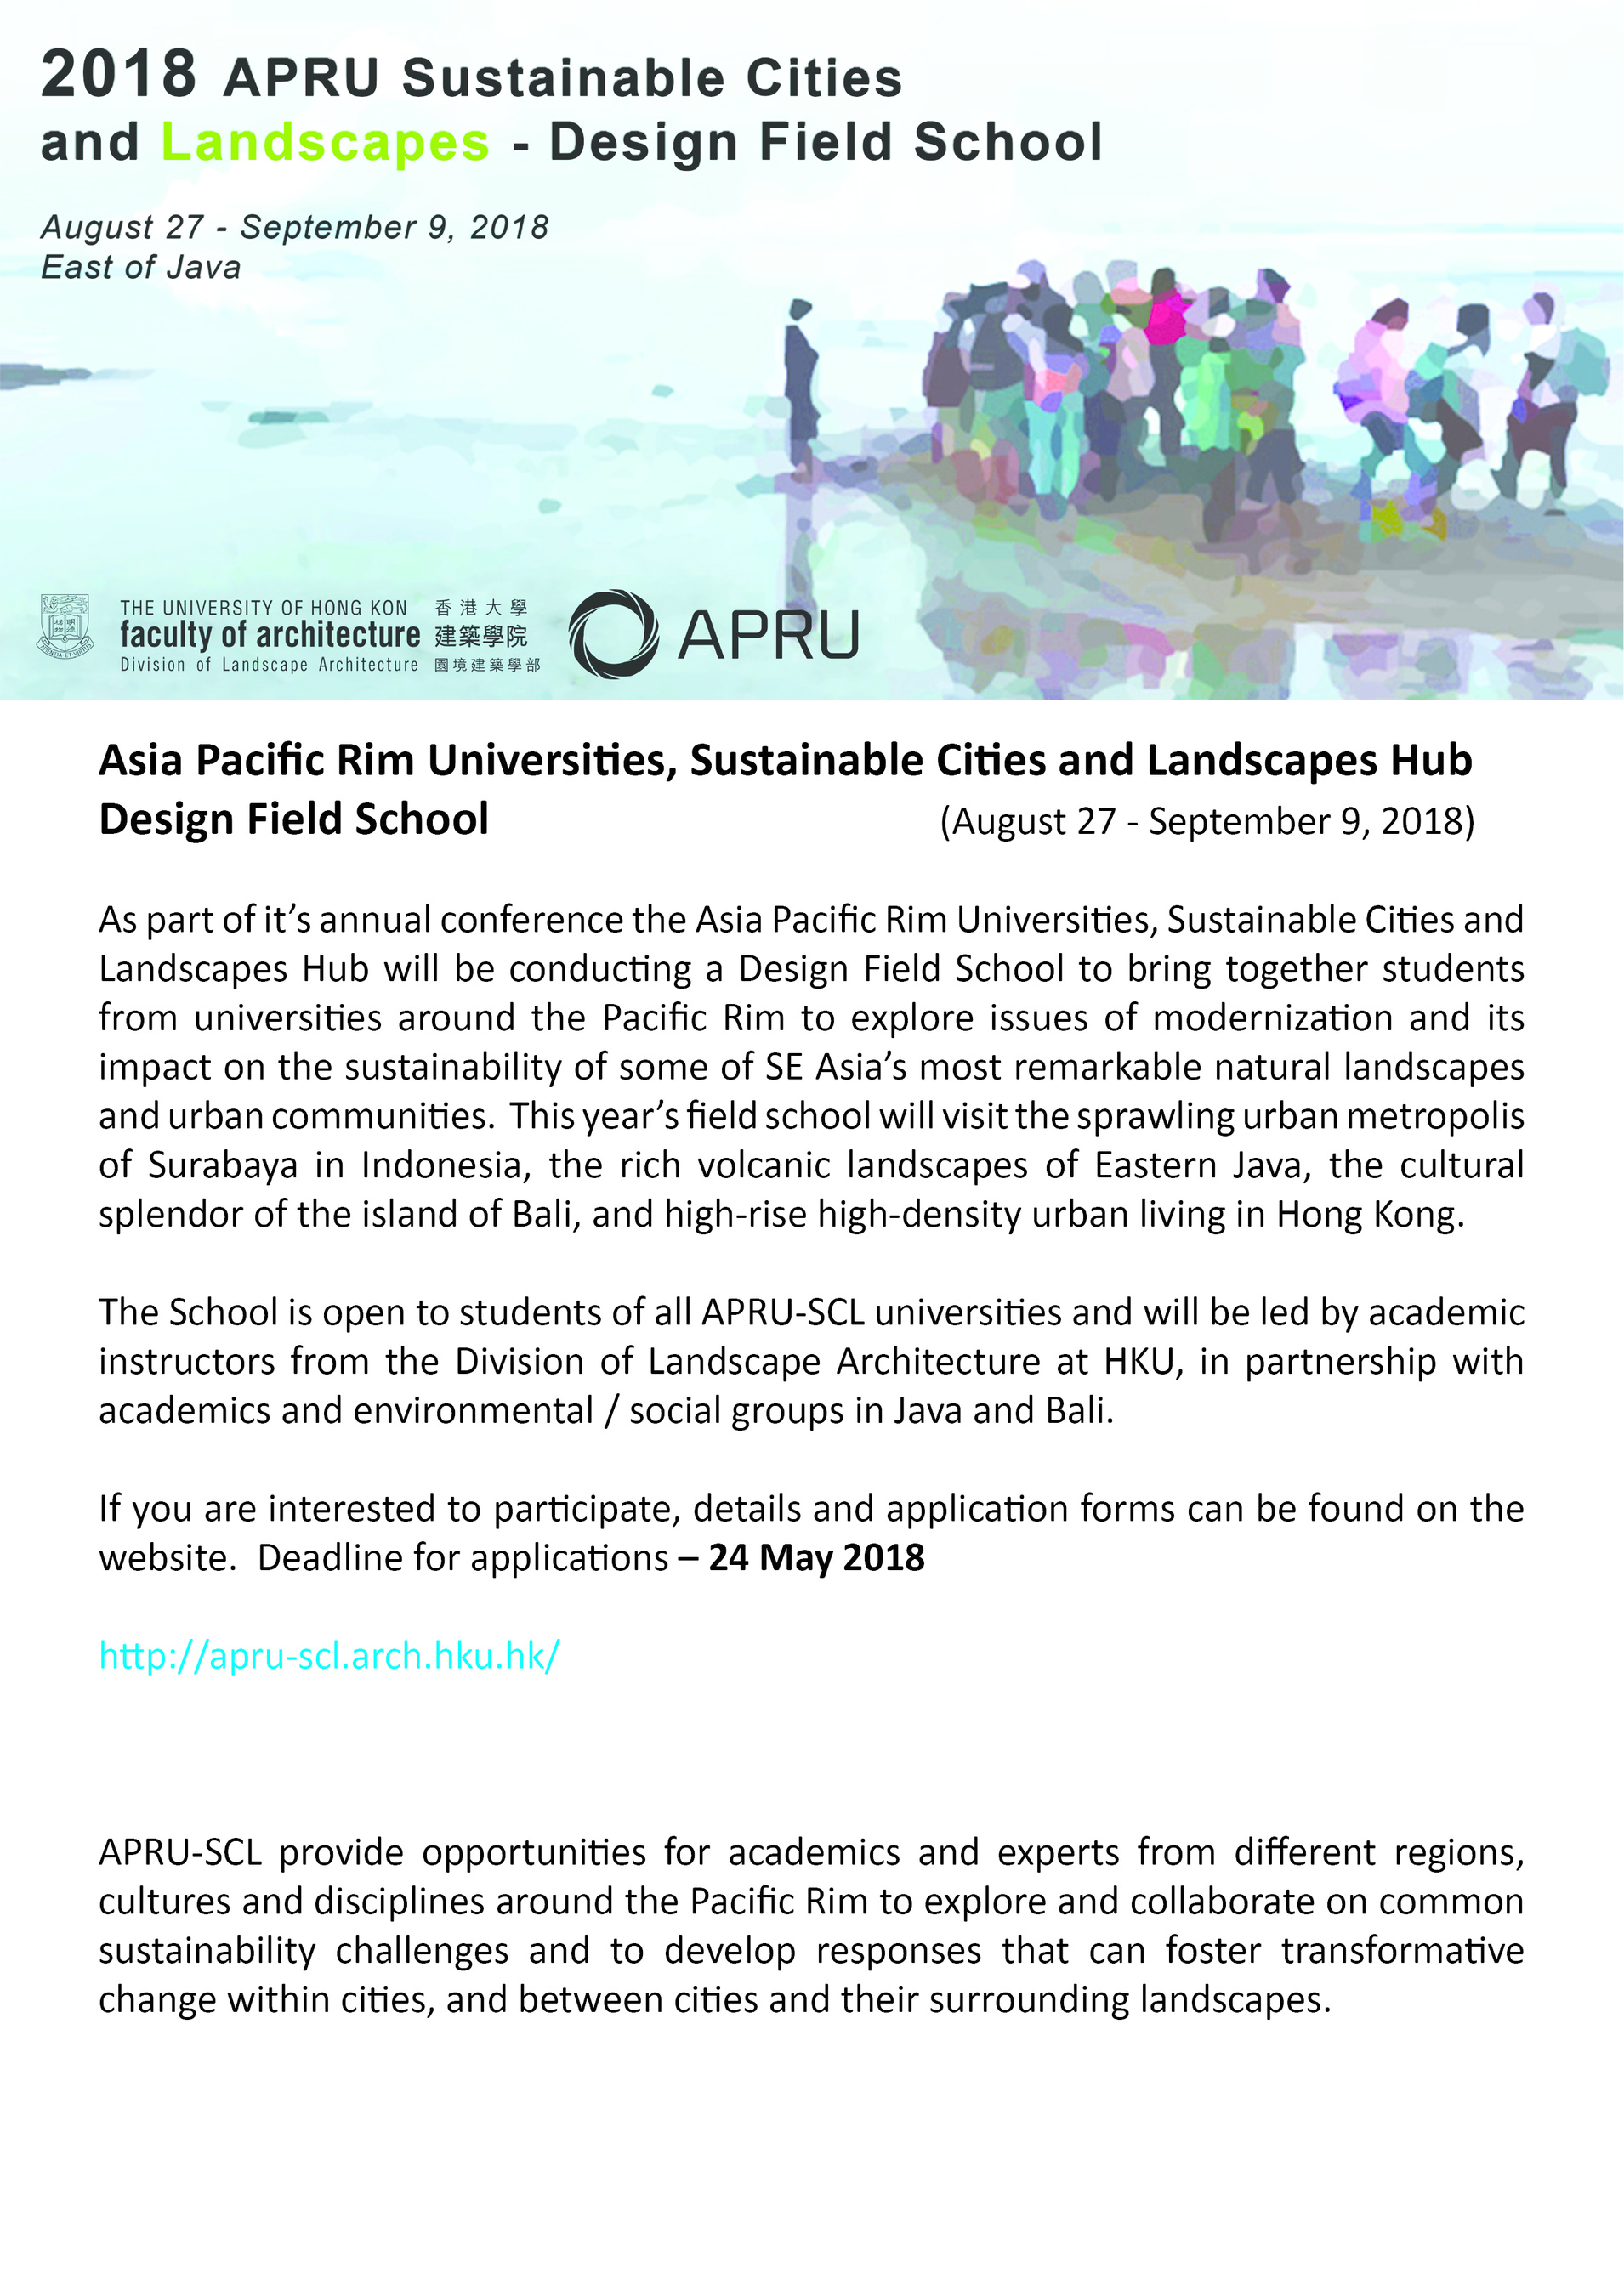 Asia Pacific Rim Universities, Sustainable Cities and Landscapes HubDesign Field School